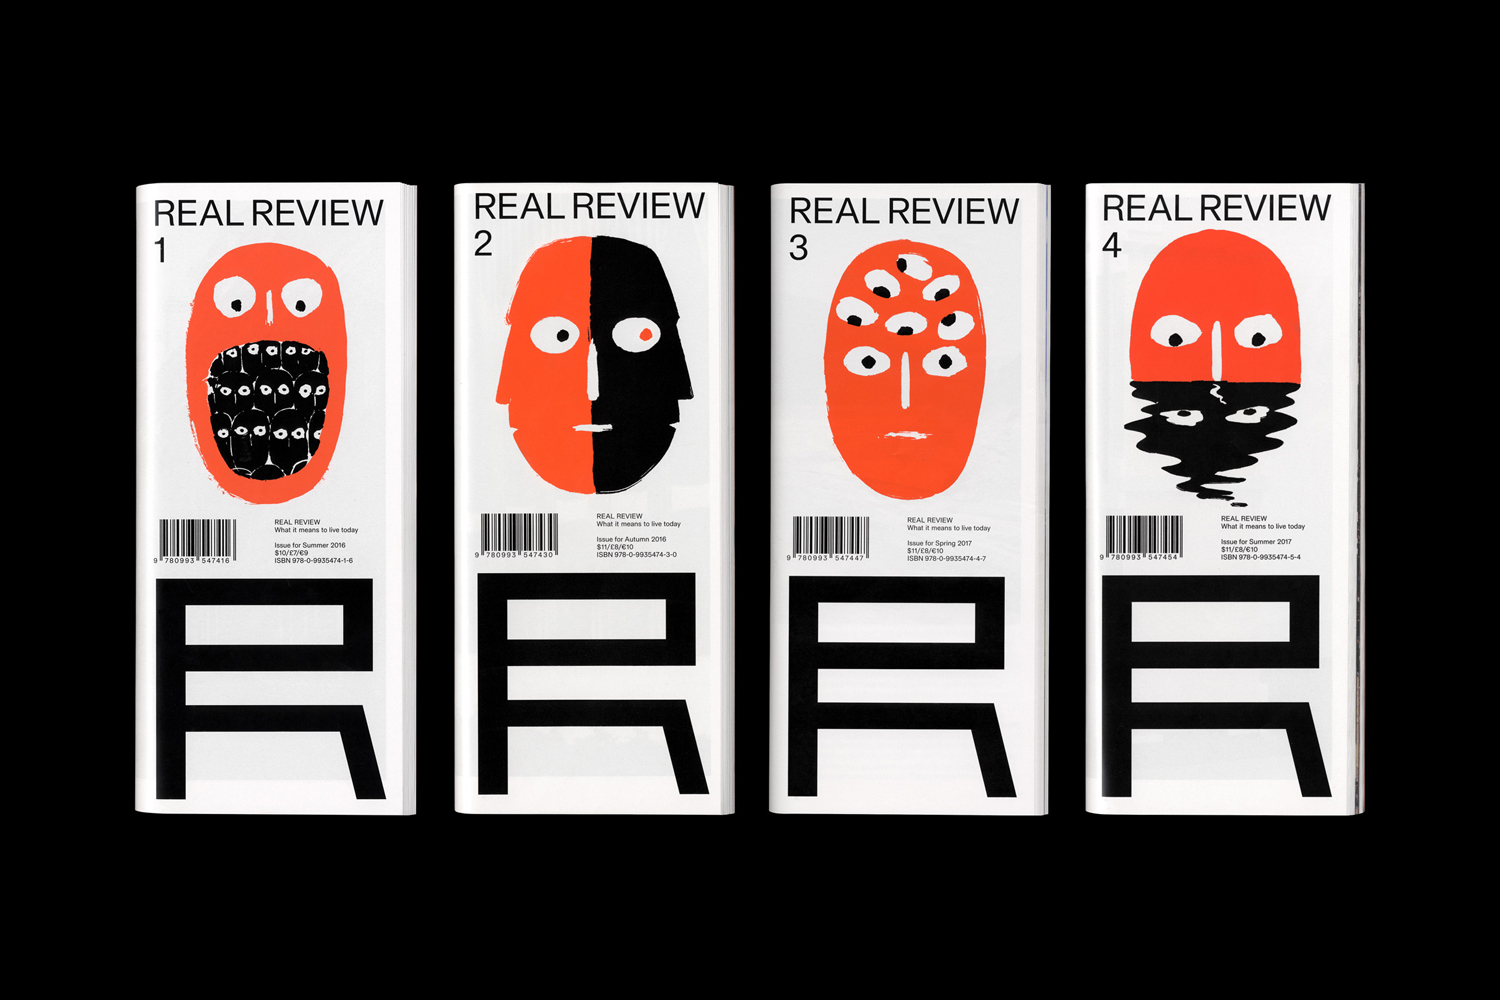 Real Review designed by OK-RM created and edited by Jack Self